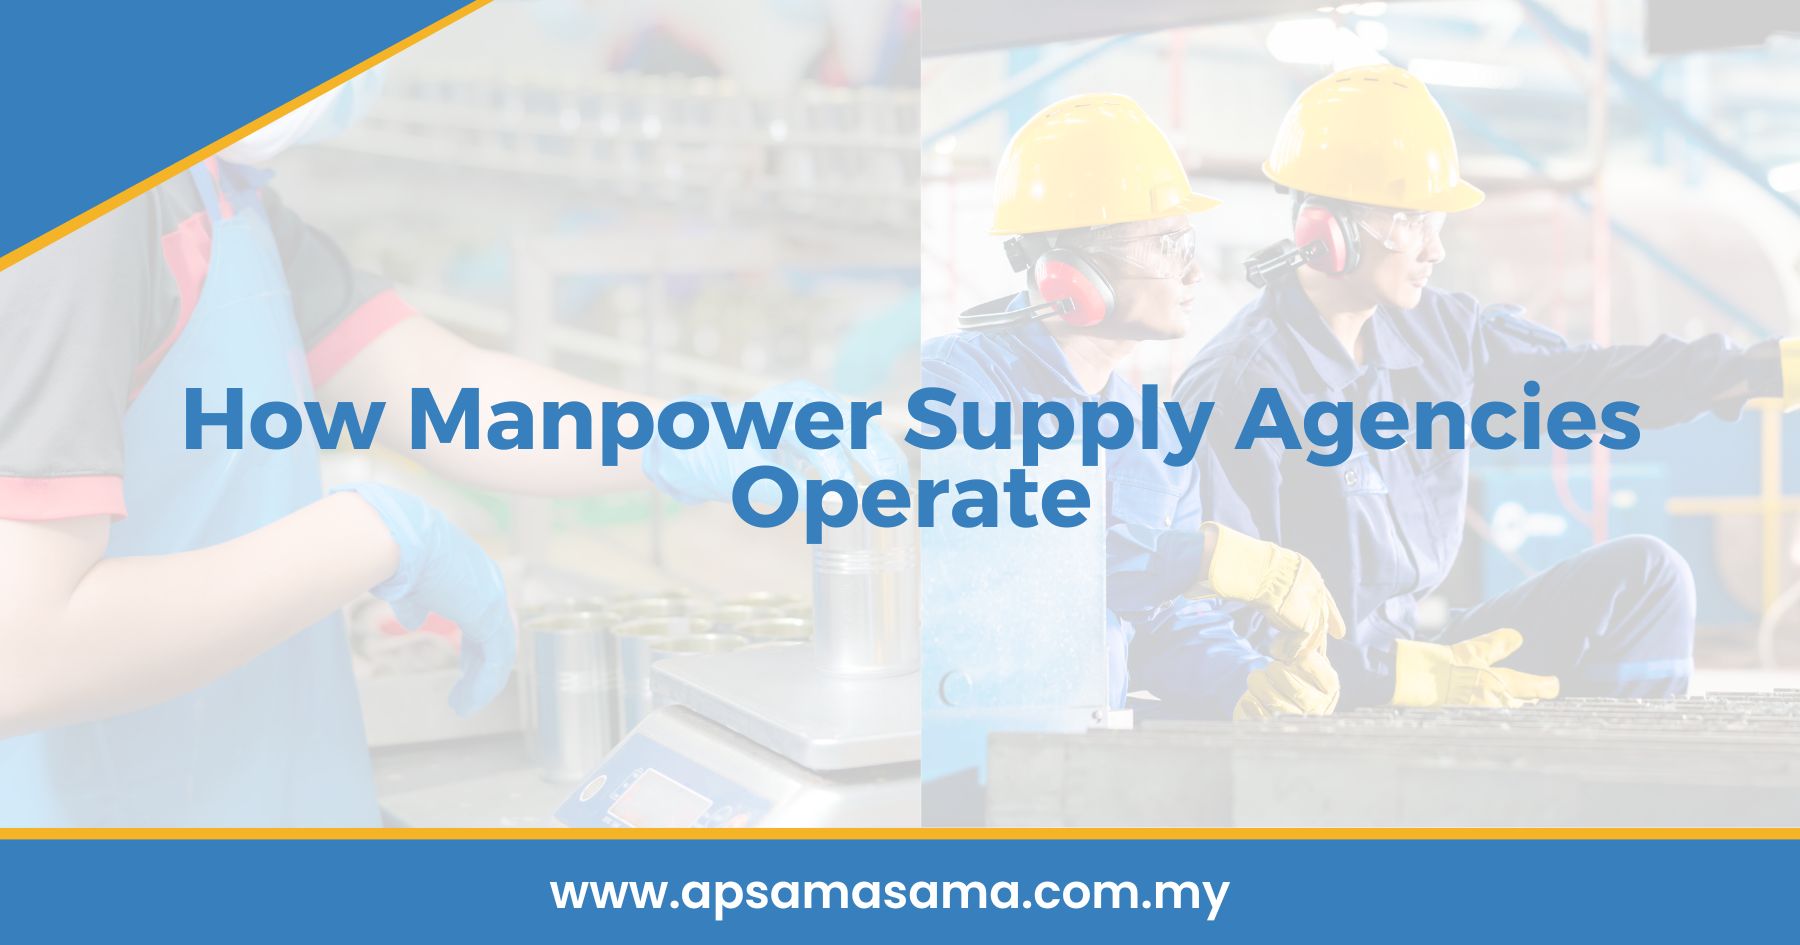 How Manpower Supply Agencies Operate